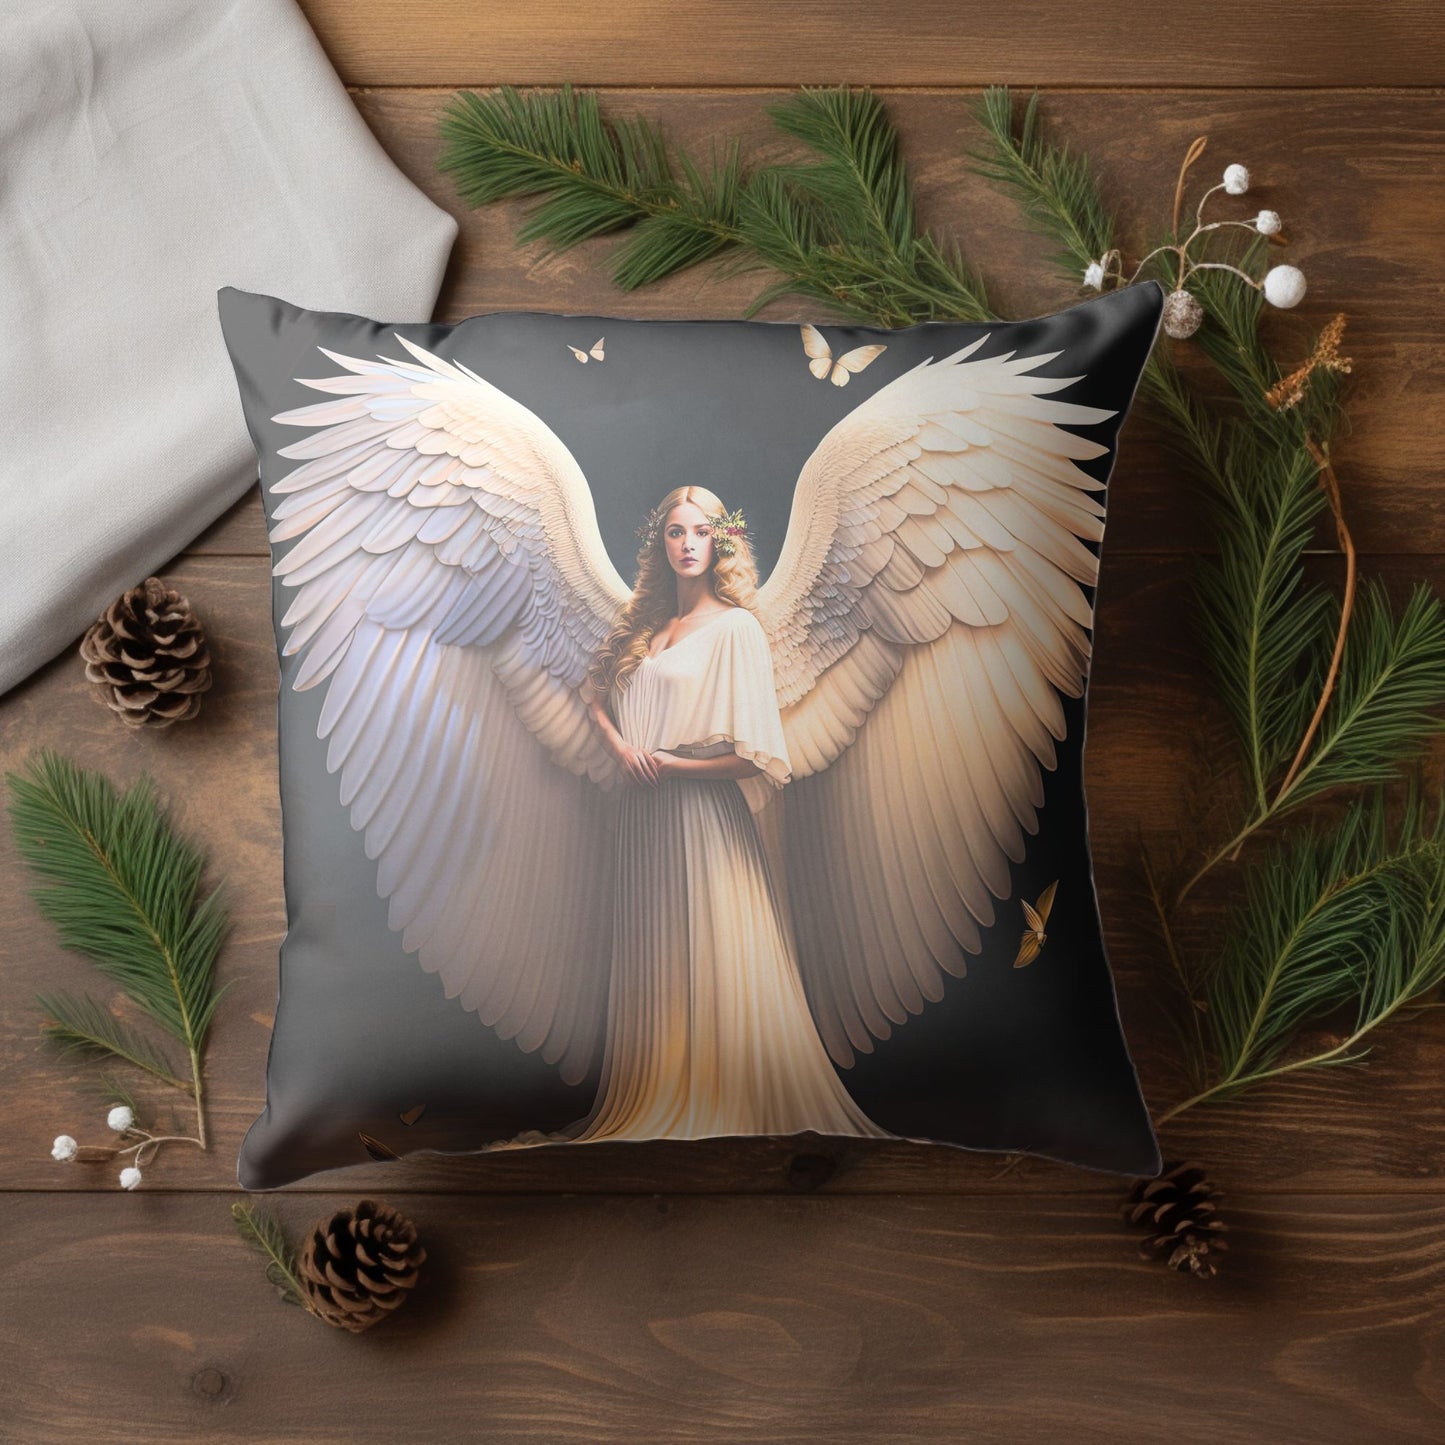 Angelic Theme Pillow Cover for a Heavenly Holiday